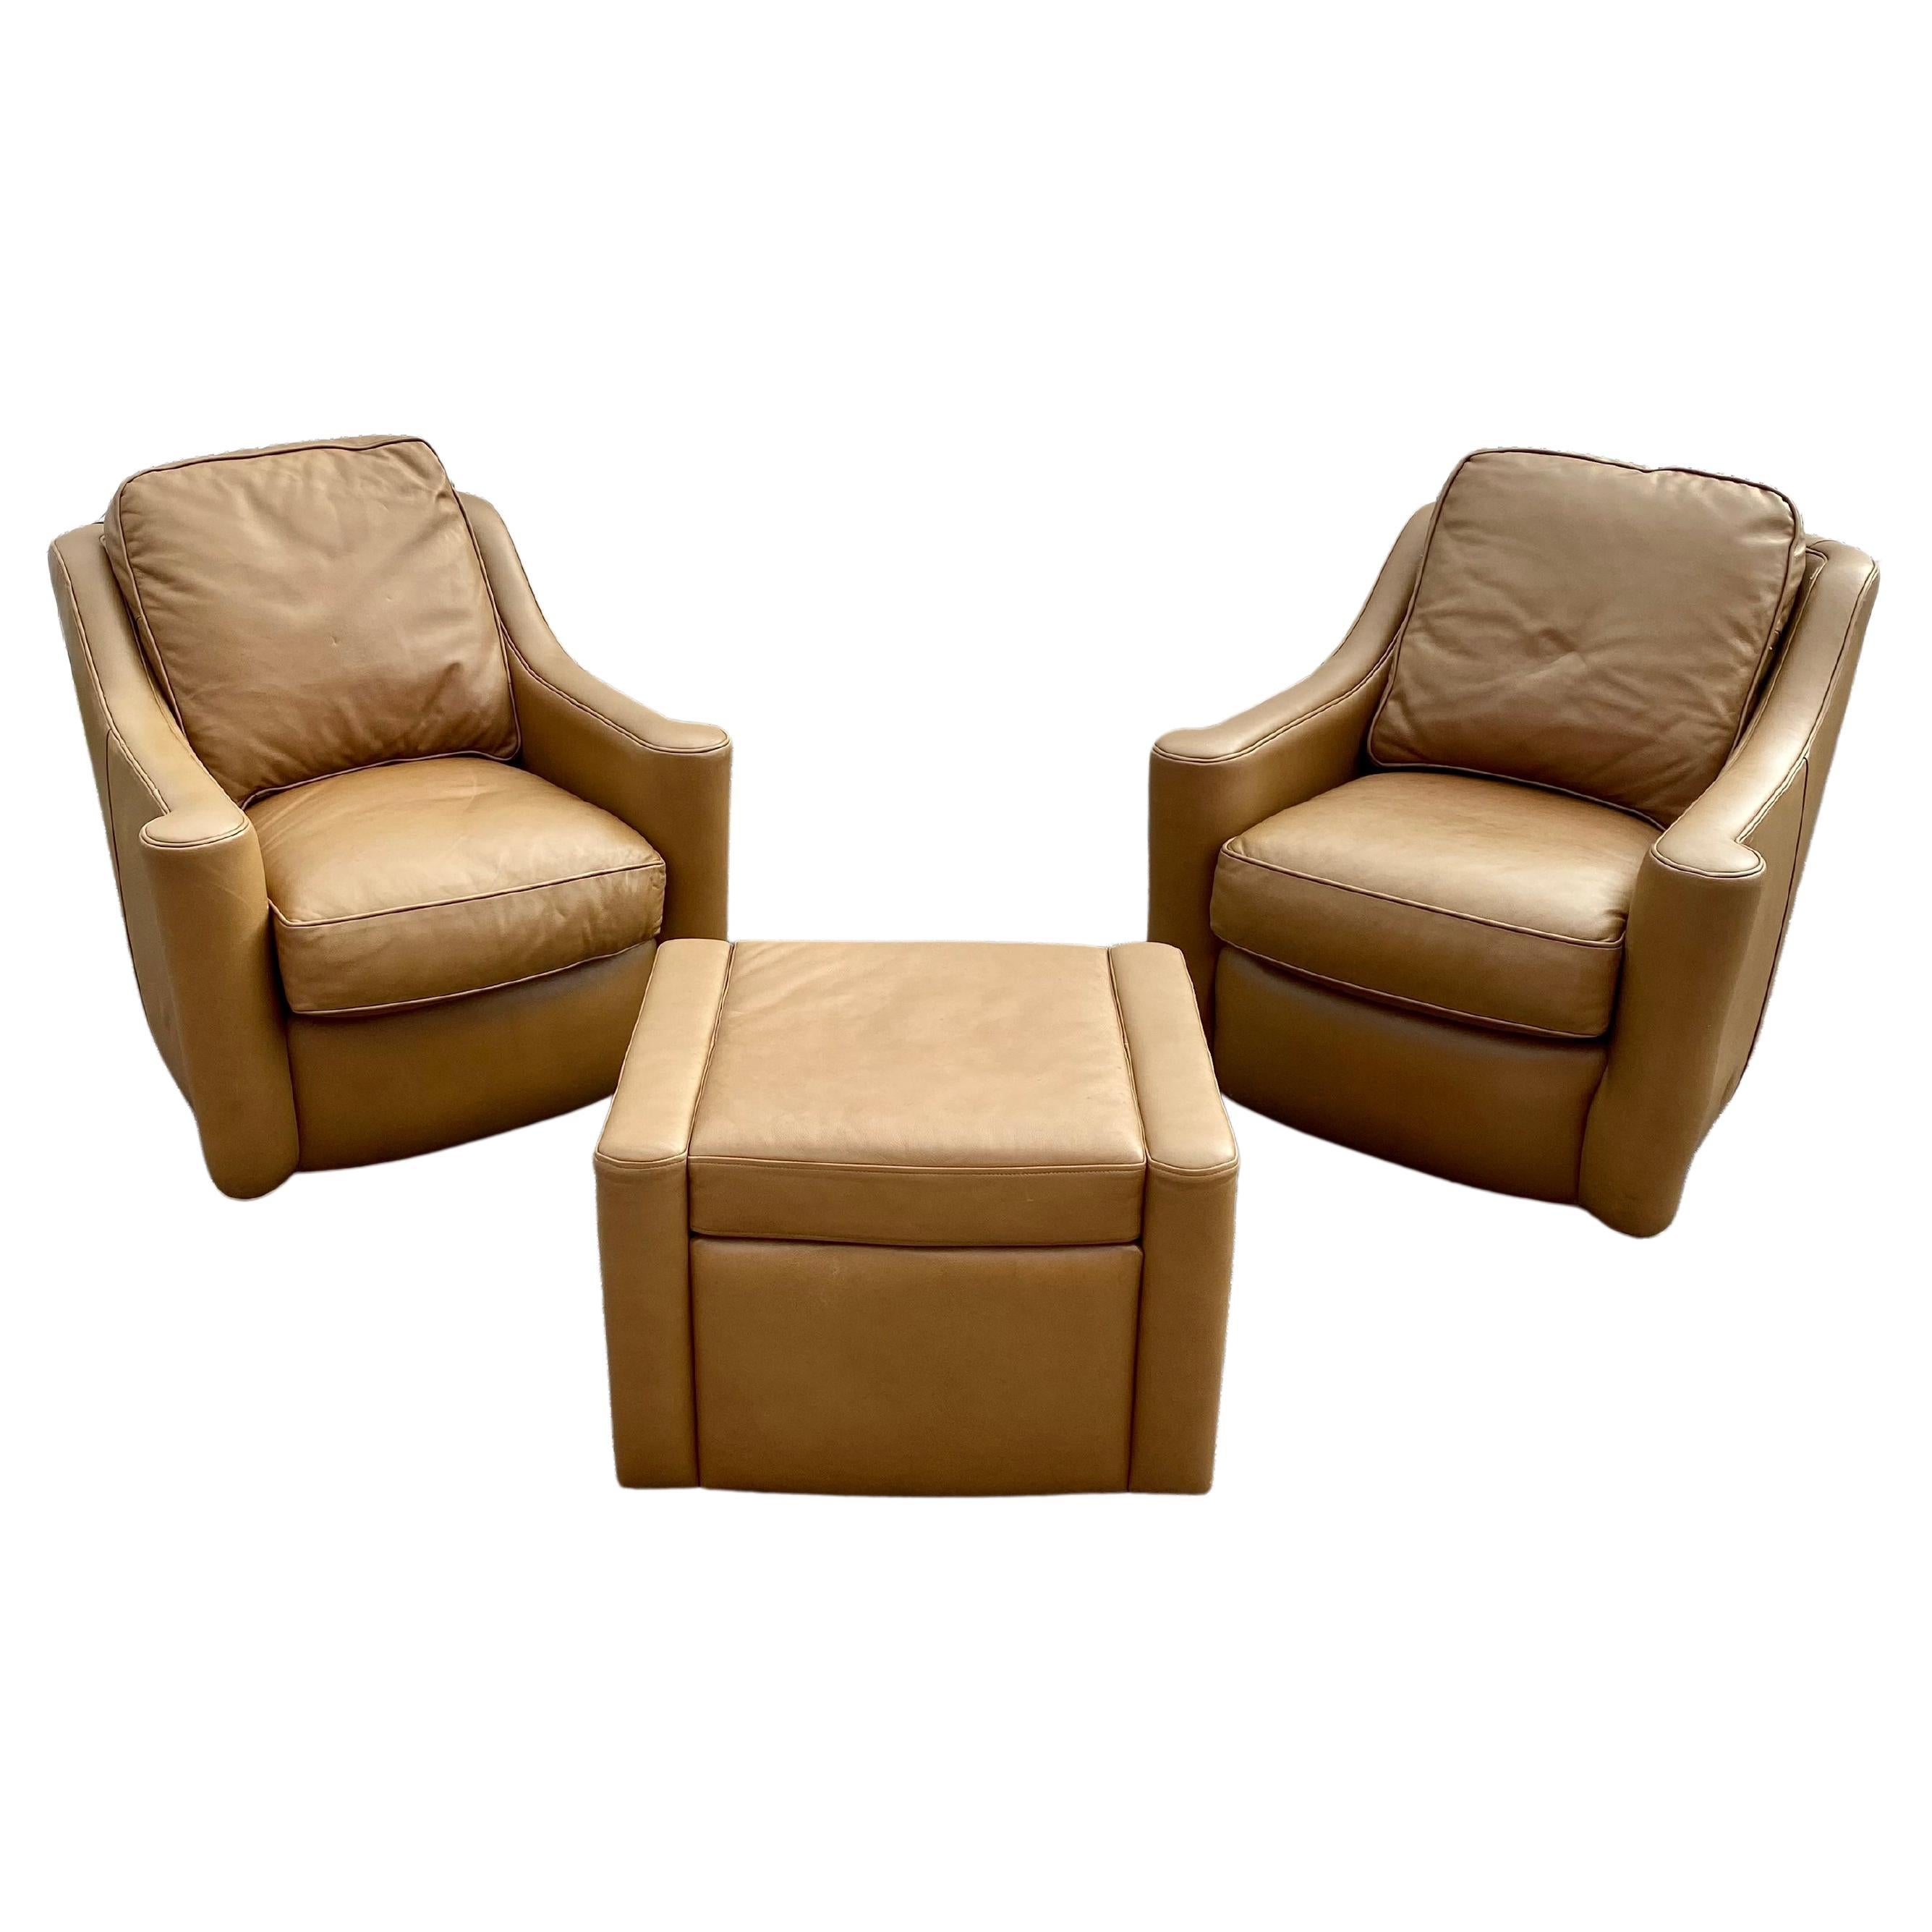 1990s Hancock & Moore Leather Swivel Chairs and Ottoman, Set of 3 For Sale